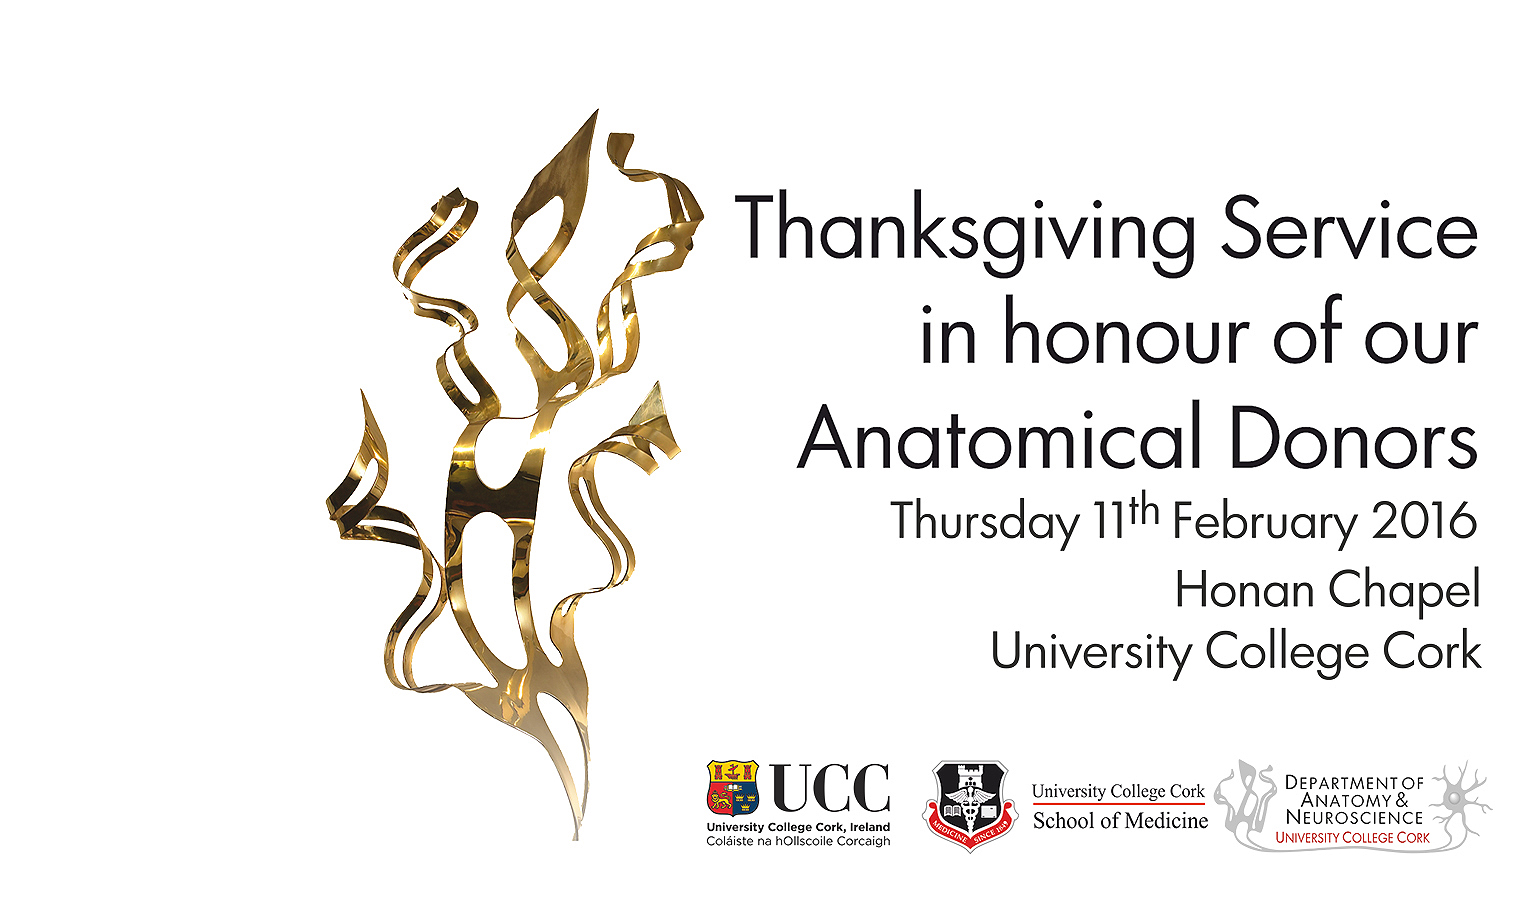 Department of Anatomy and Neuroscience host third Thanksgiving Service